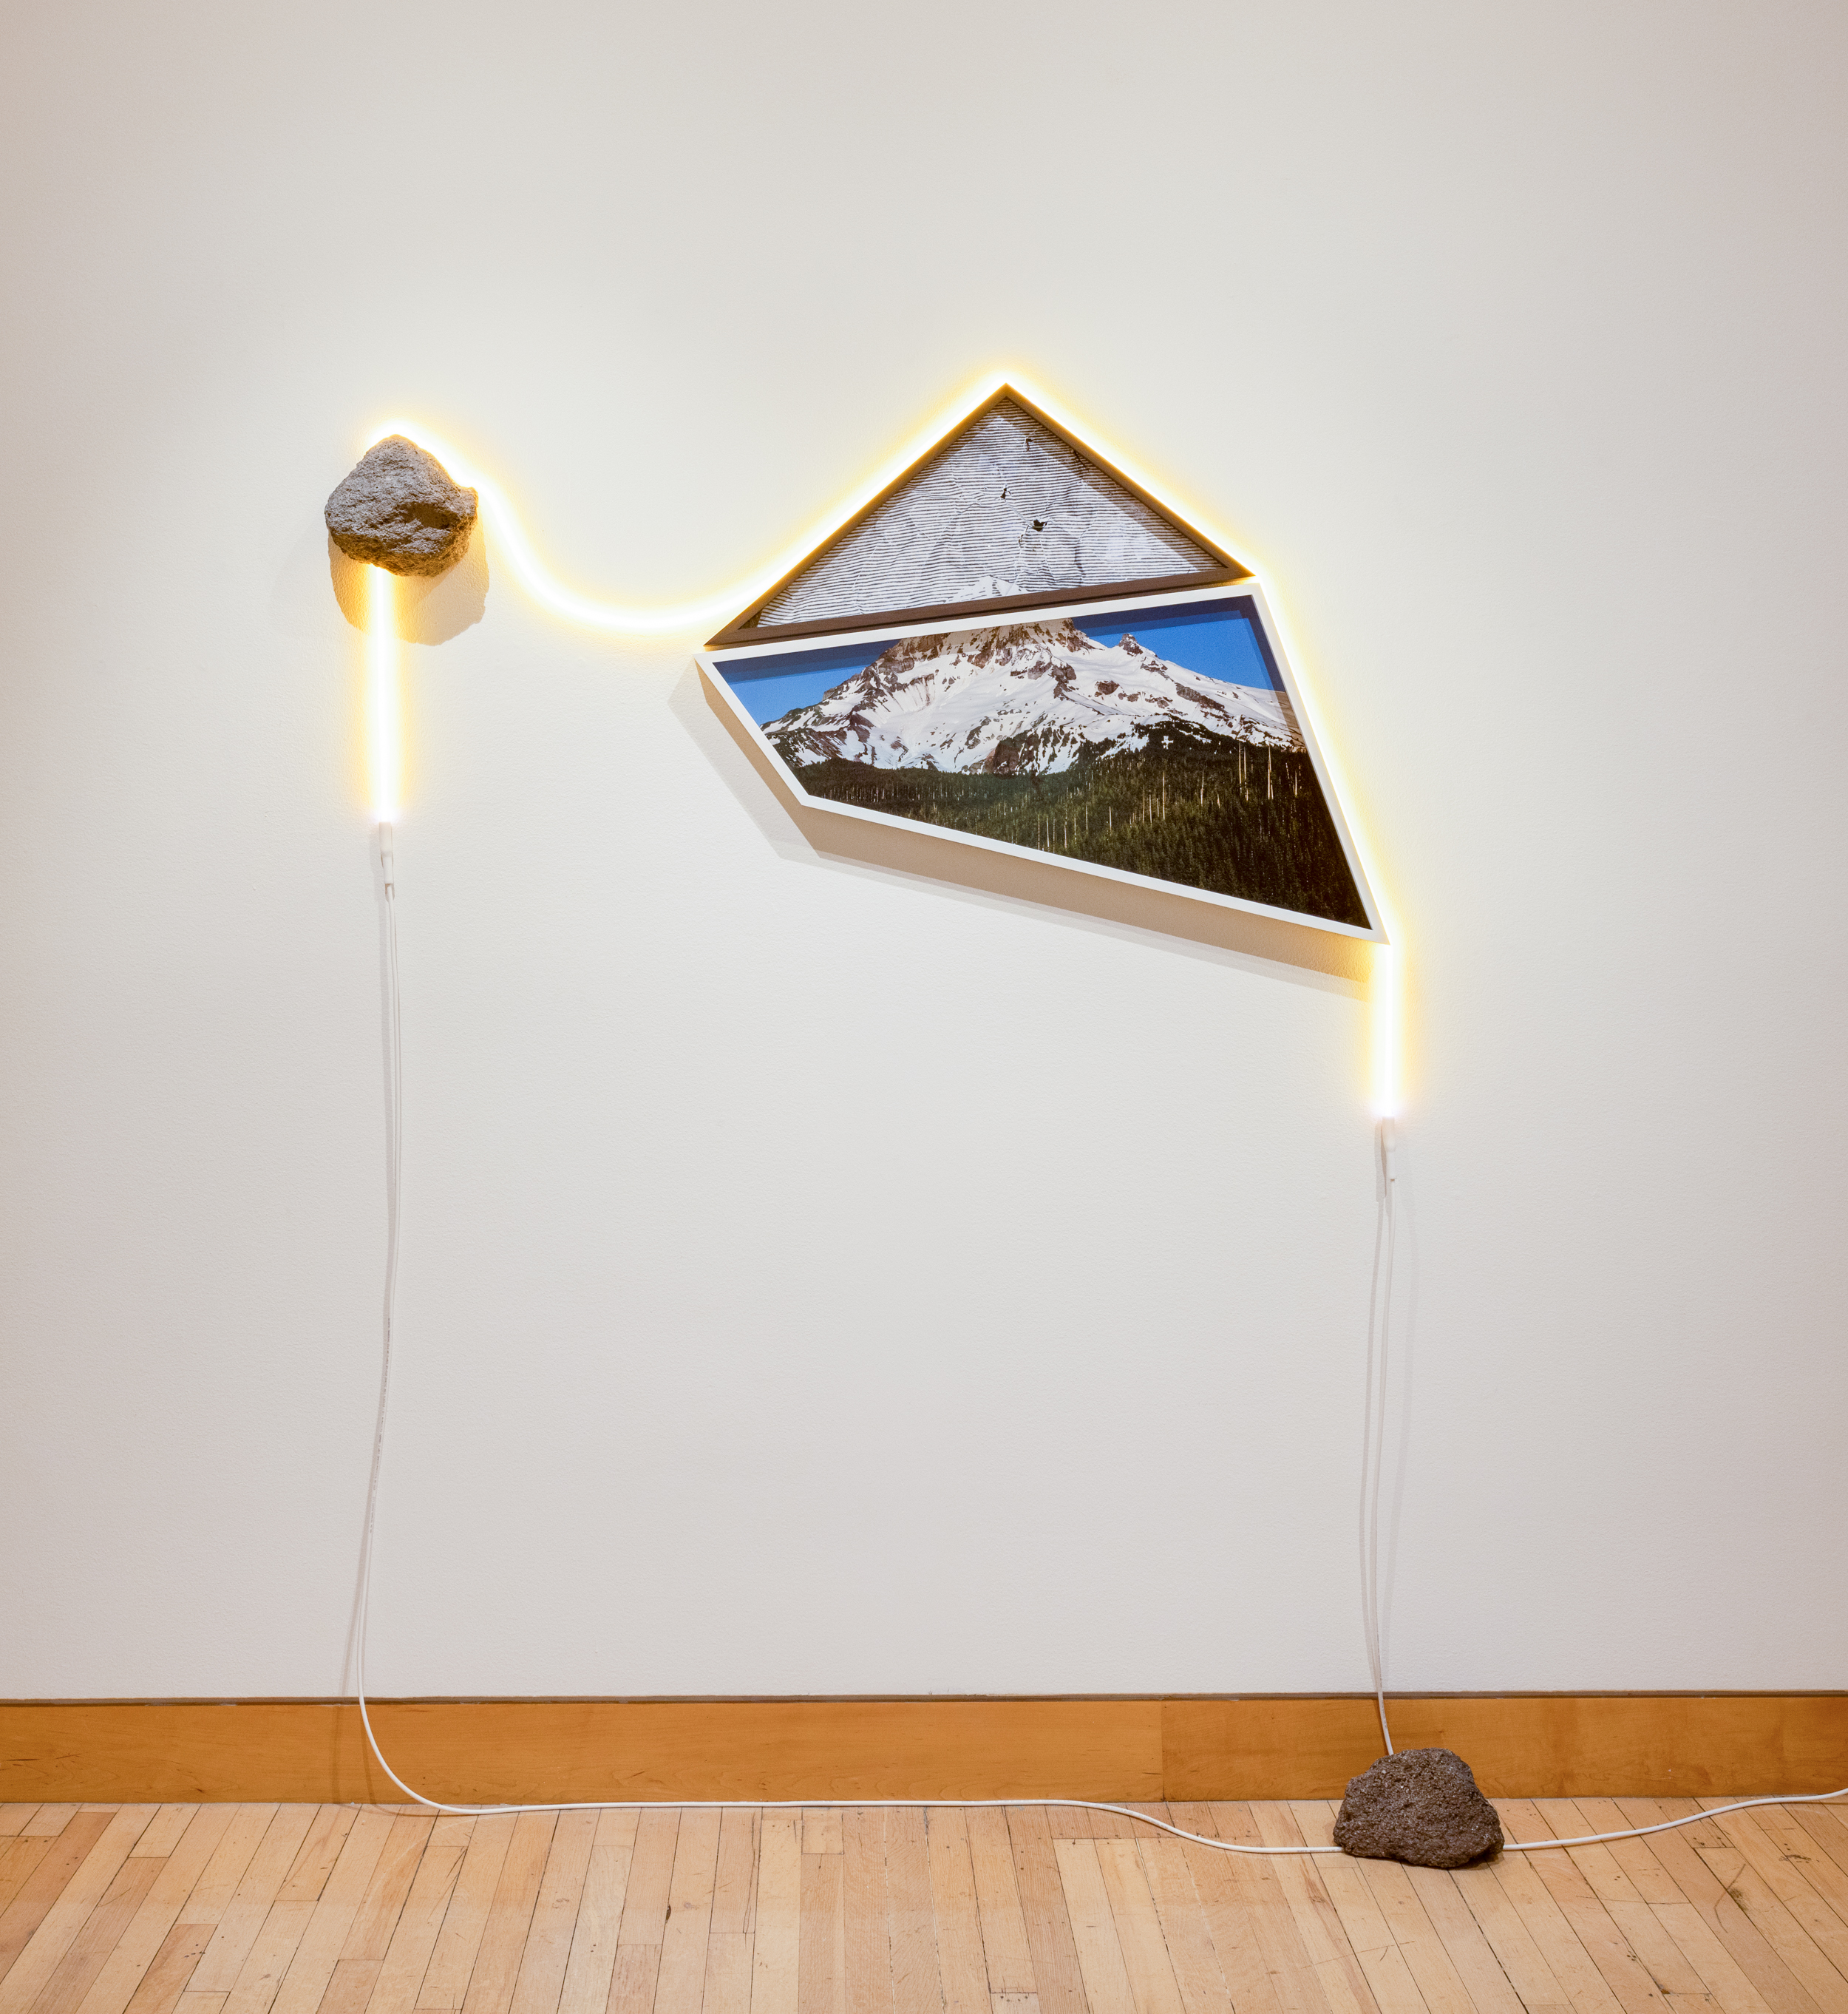 Sculpture with two rocks, a strip of neon, and two framed images